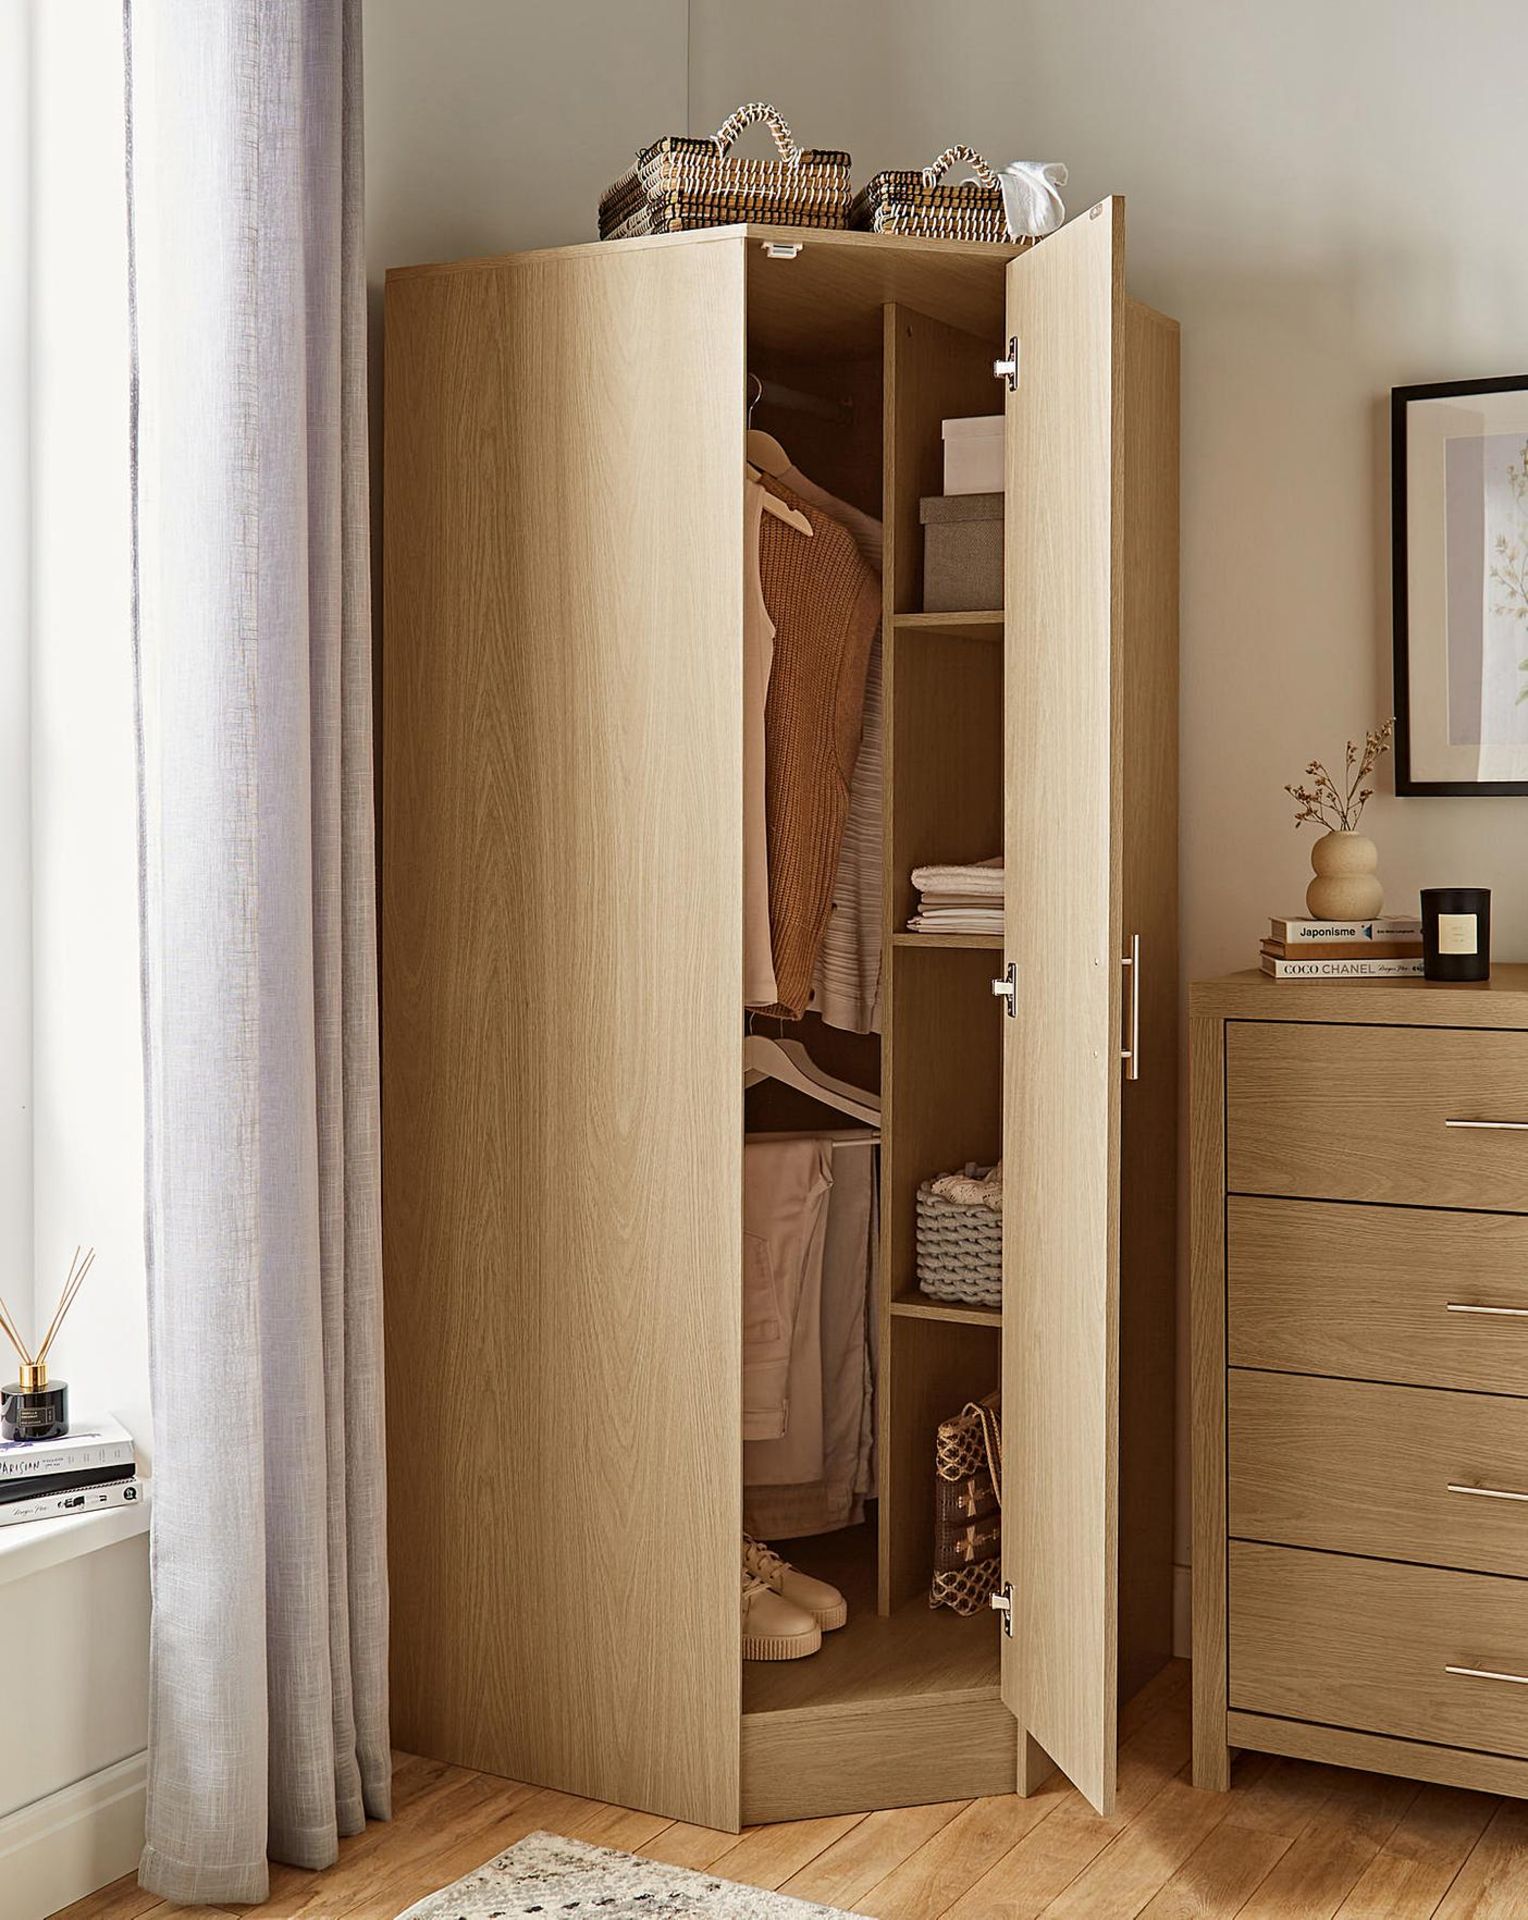 NEW & BOXED DAKOTA Corner Wardrobe. OAK EFFECT. RRP £269 EACH. Part of At Home Collection, the - Image 4 of 4